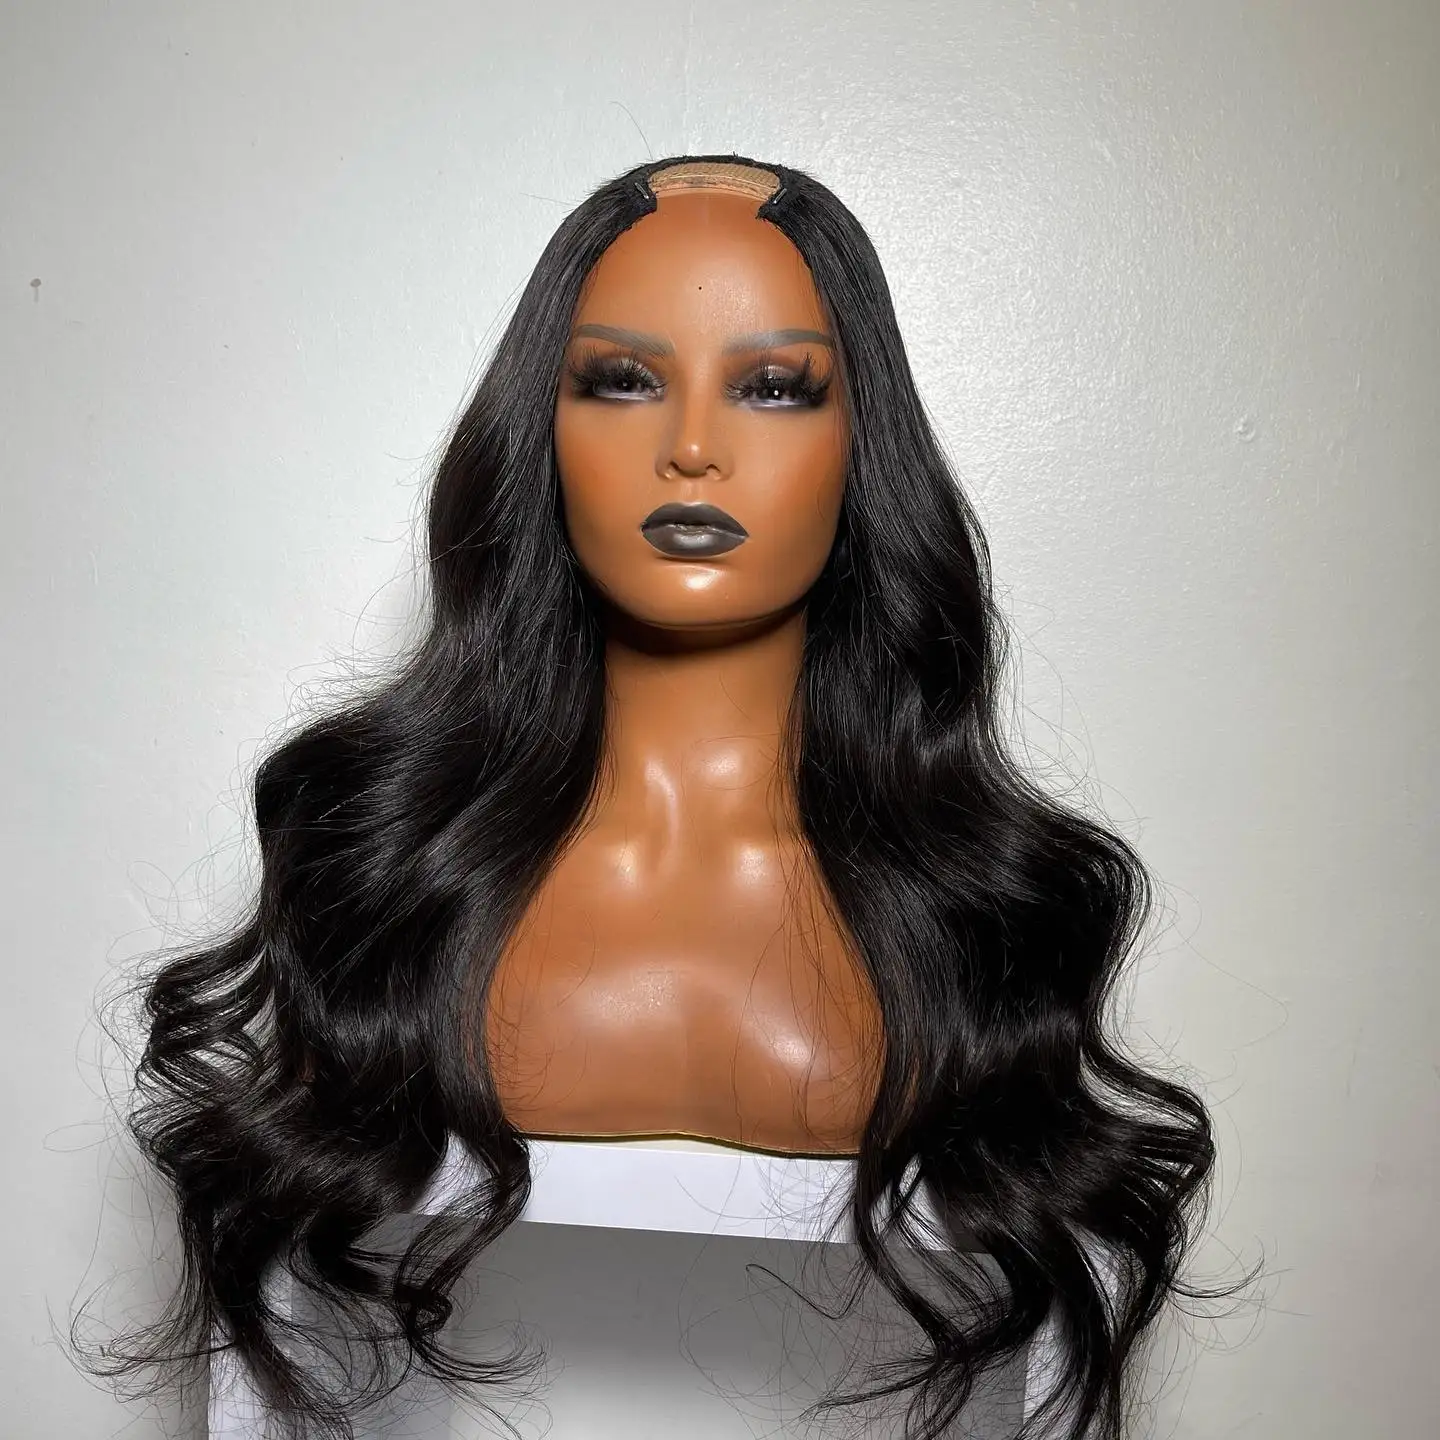 Black 24 inch Long U Part Wig European Remy Human Hair Body Wave Wigs Glueless Jewish Natural Color Soft Wig For Black Women